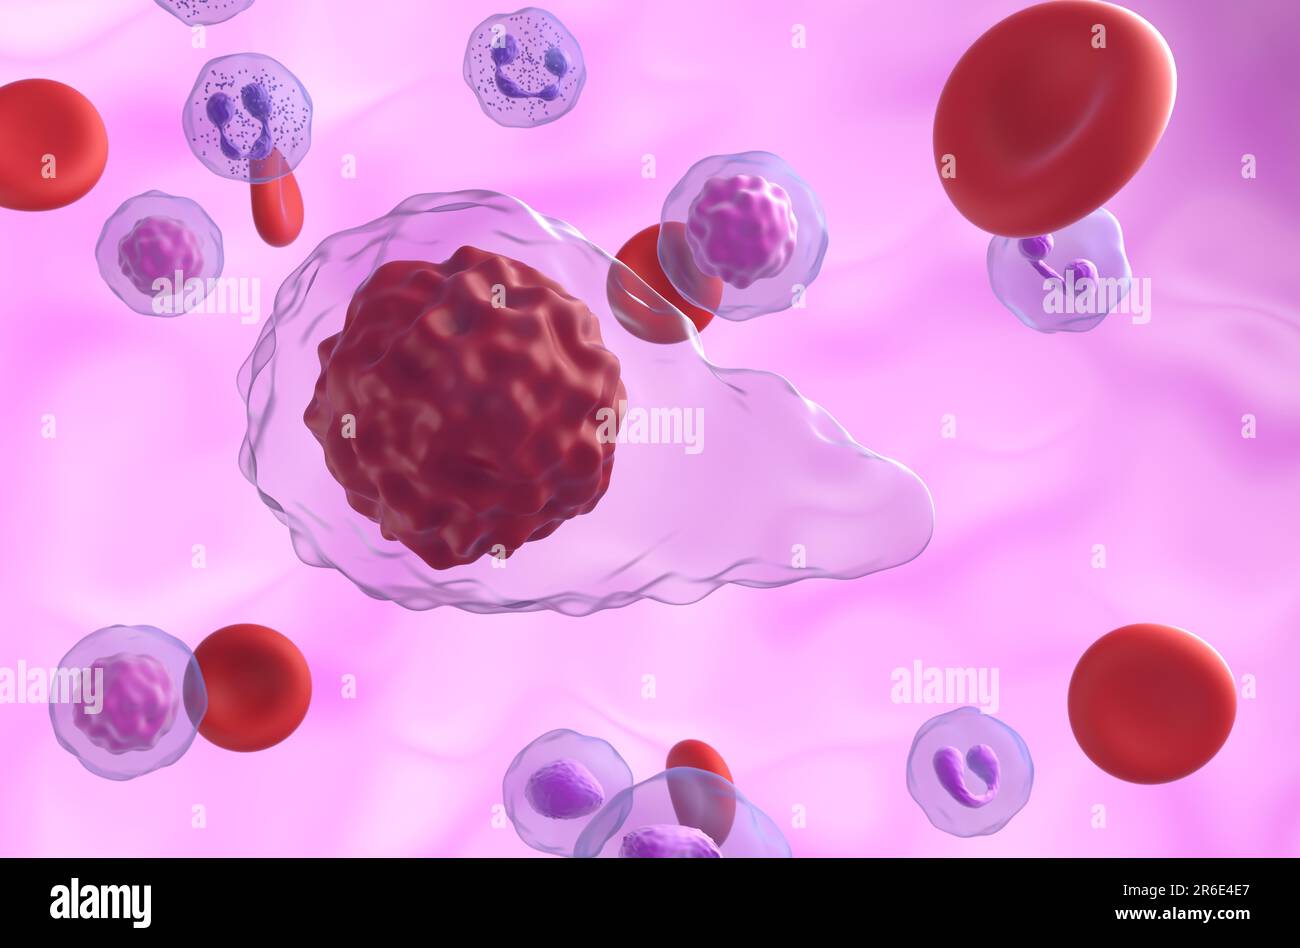 Primary myelofibrosis (PMF) cells in blood flow - closeup view 3d illustration Stock Photo